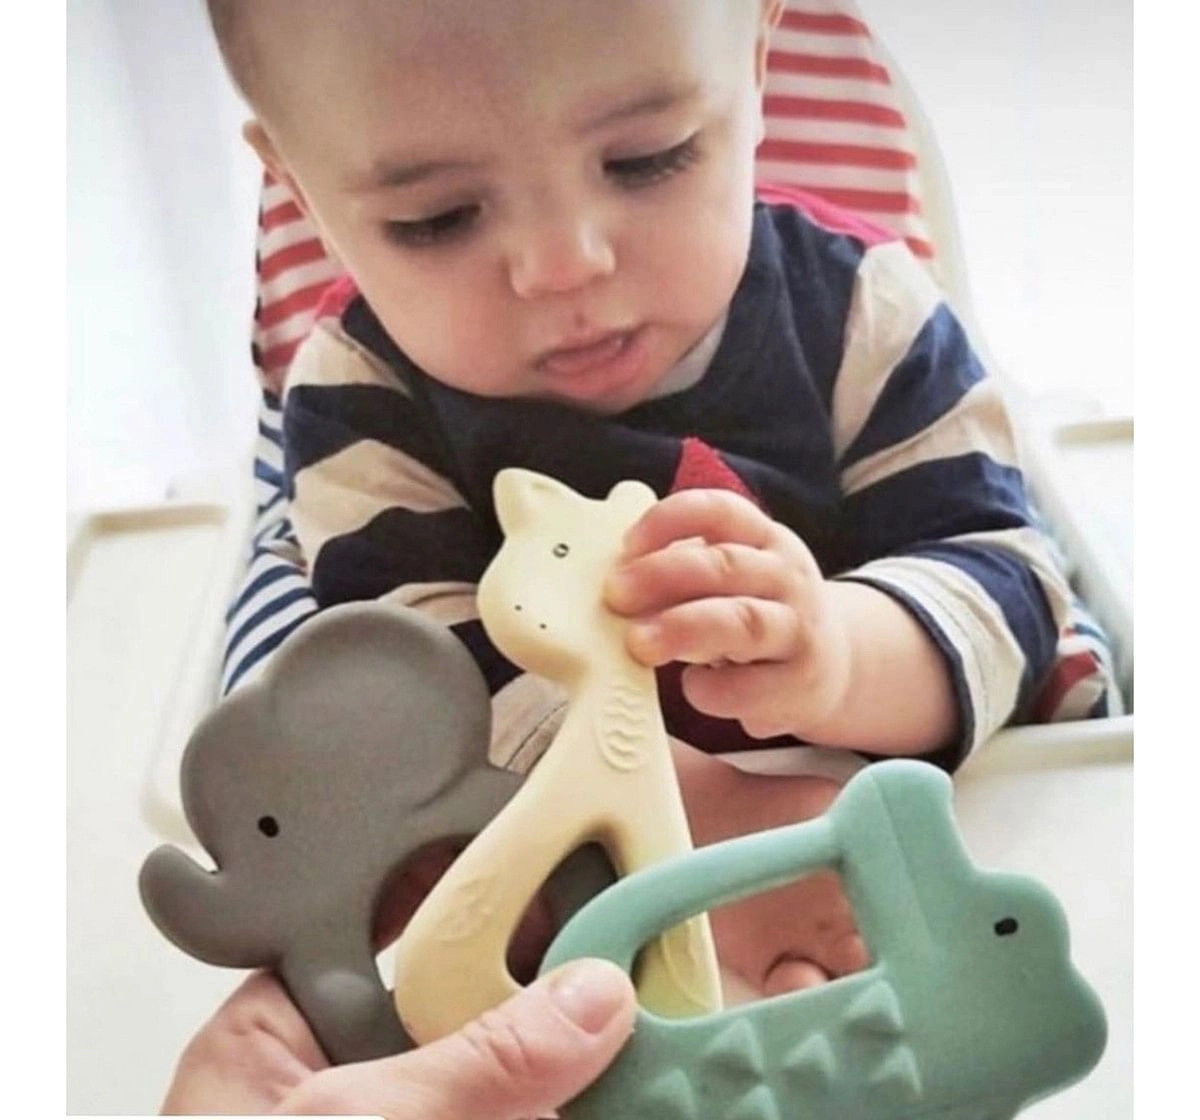 Giraffe Natural Rubber Teether for Kids age 0M+